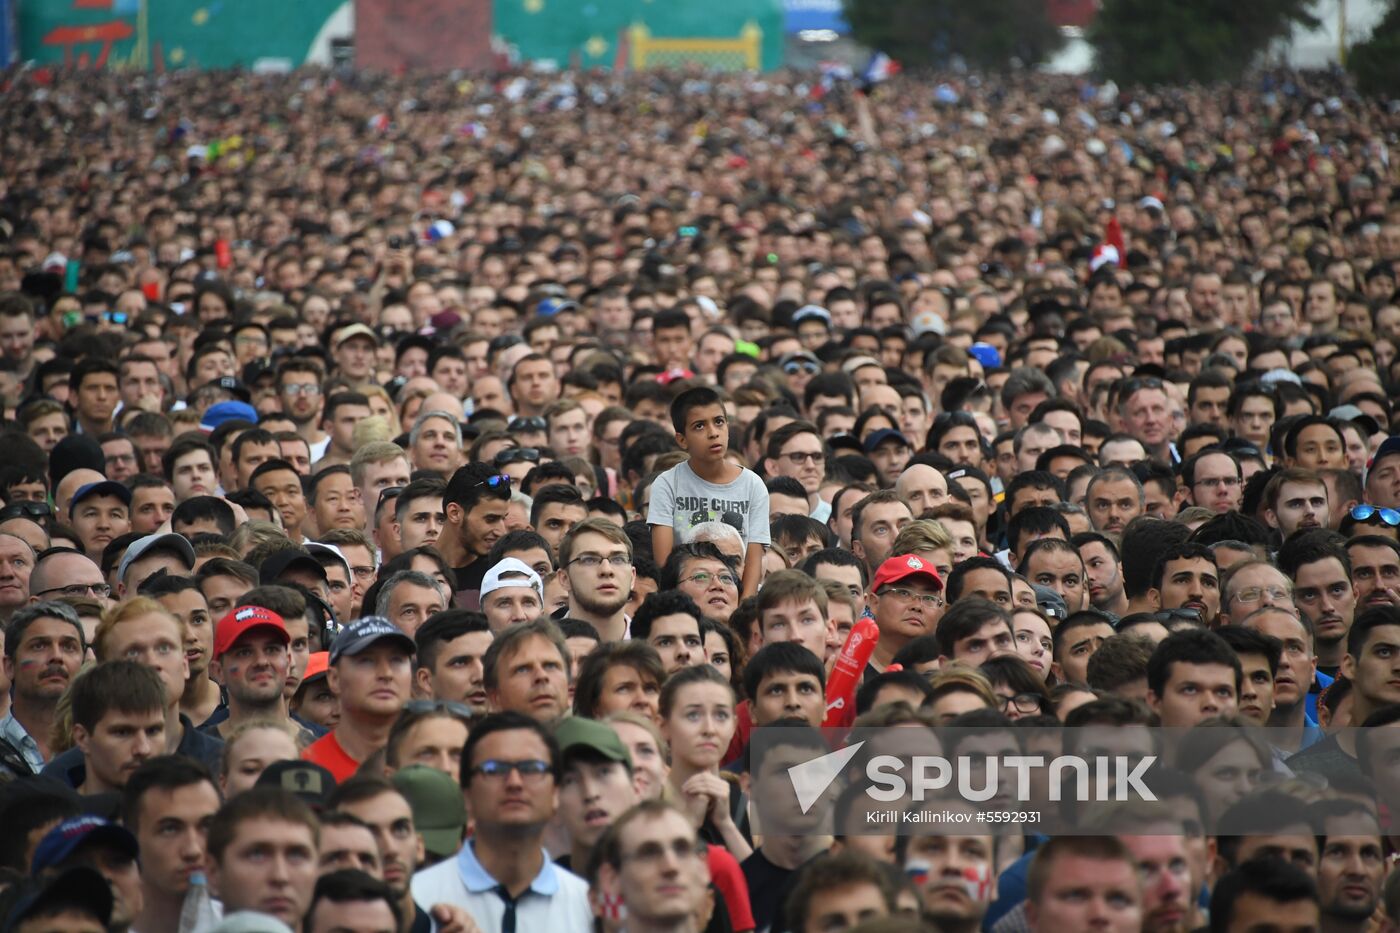  Russia World Cup Fans